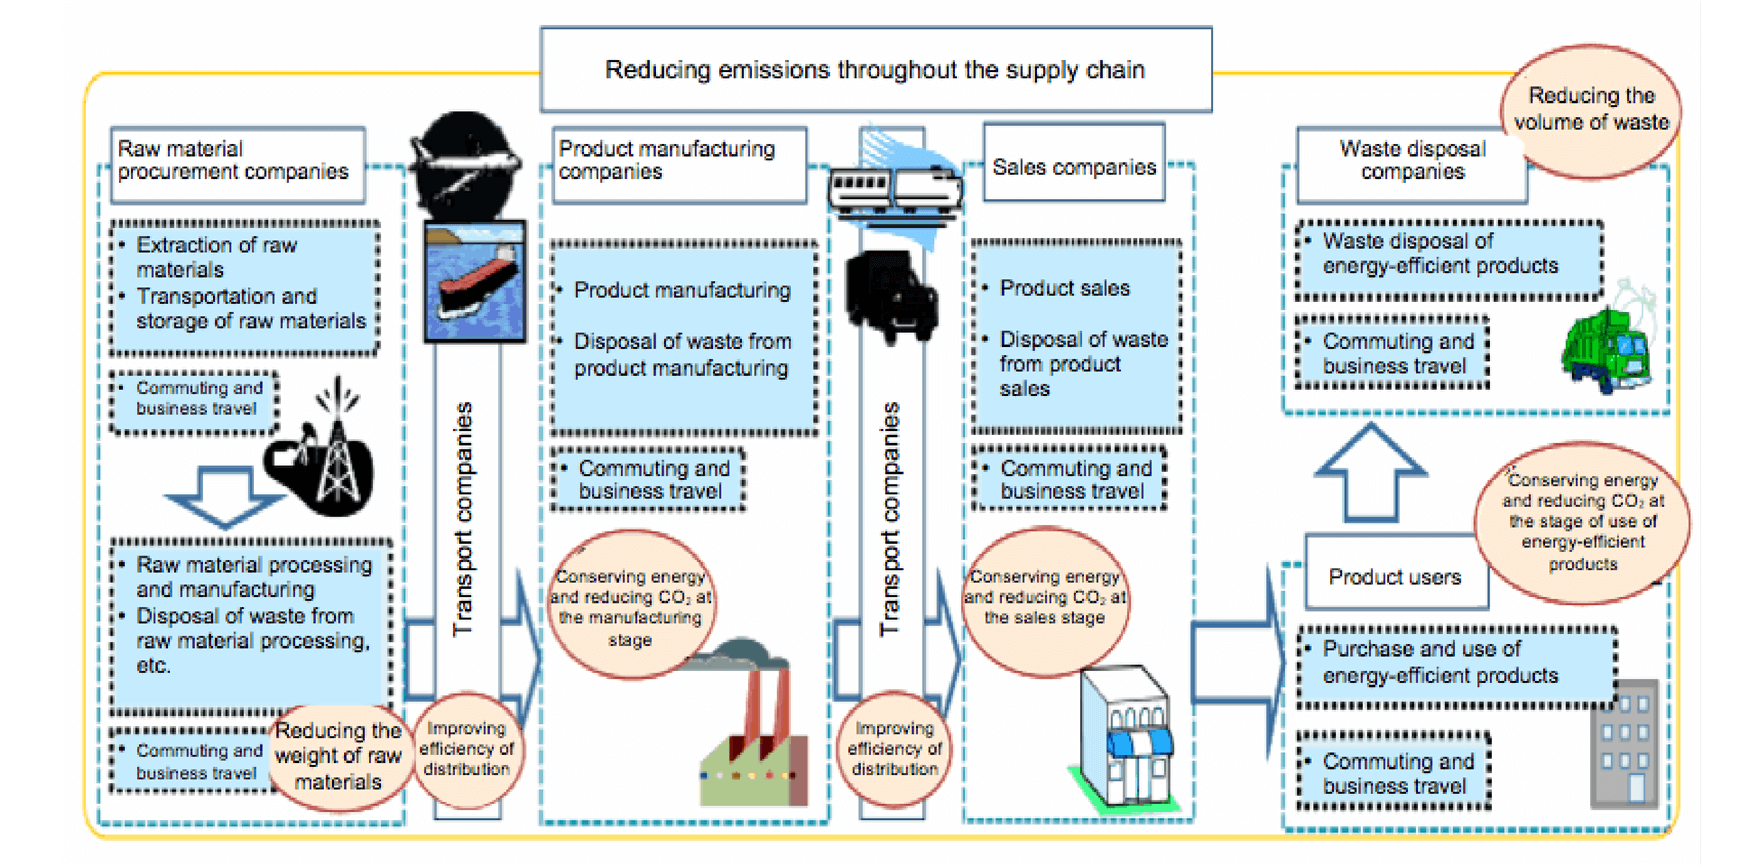 Fig. the scope of supply chain emissions and reduction of emissions